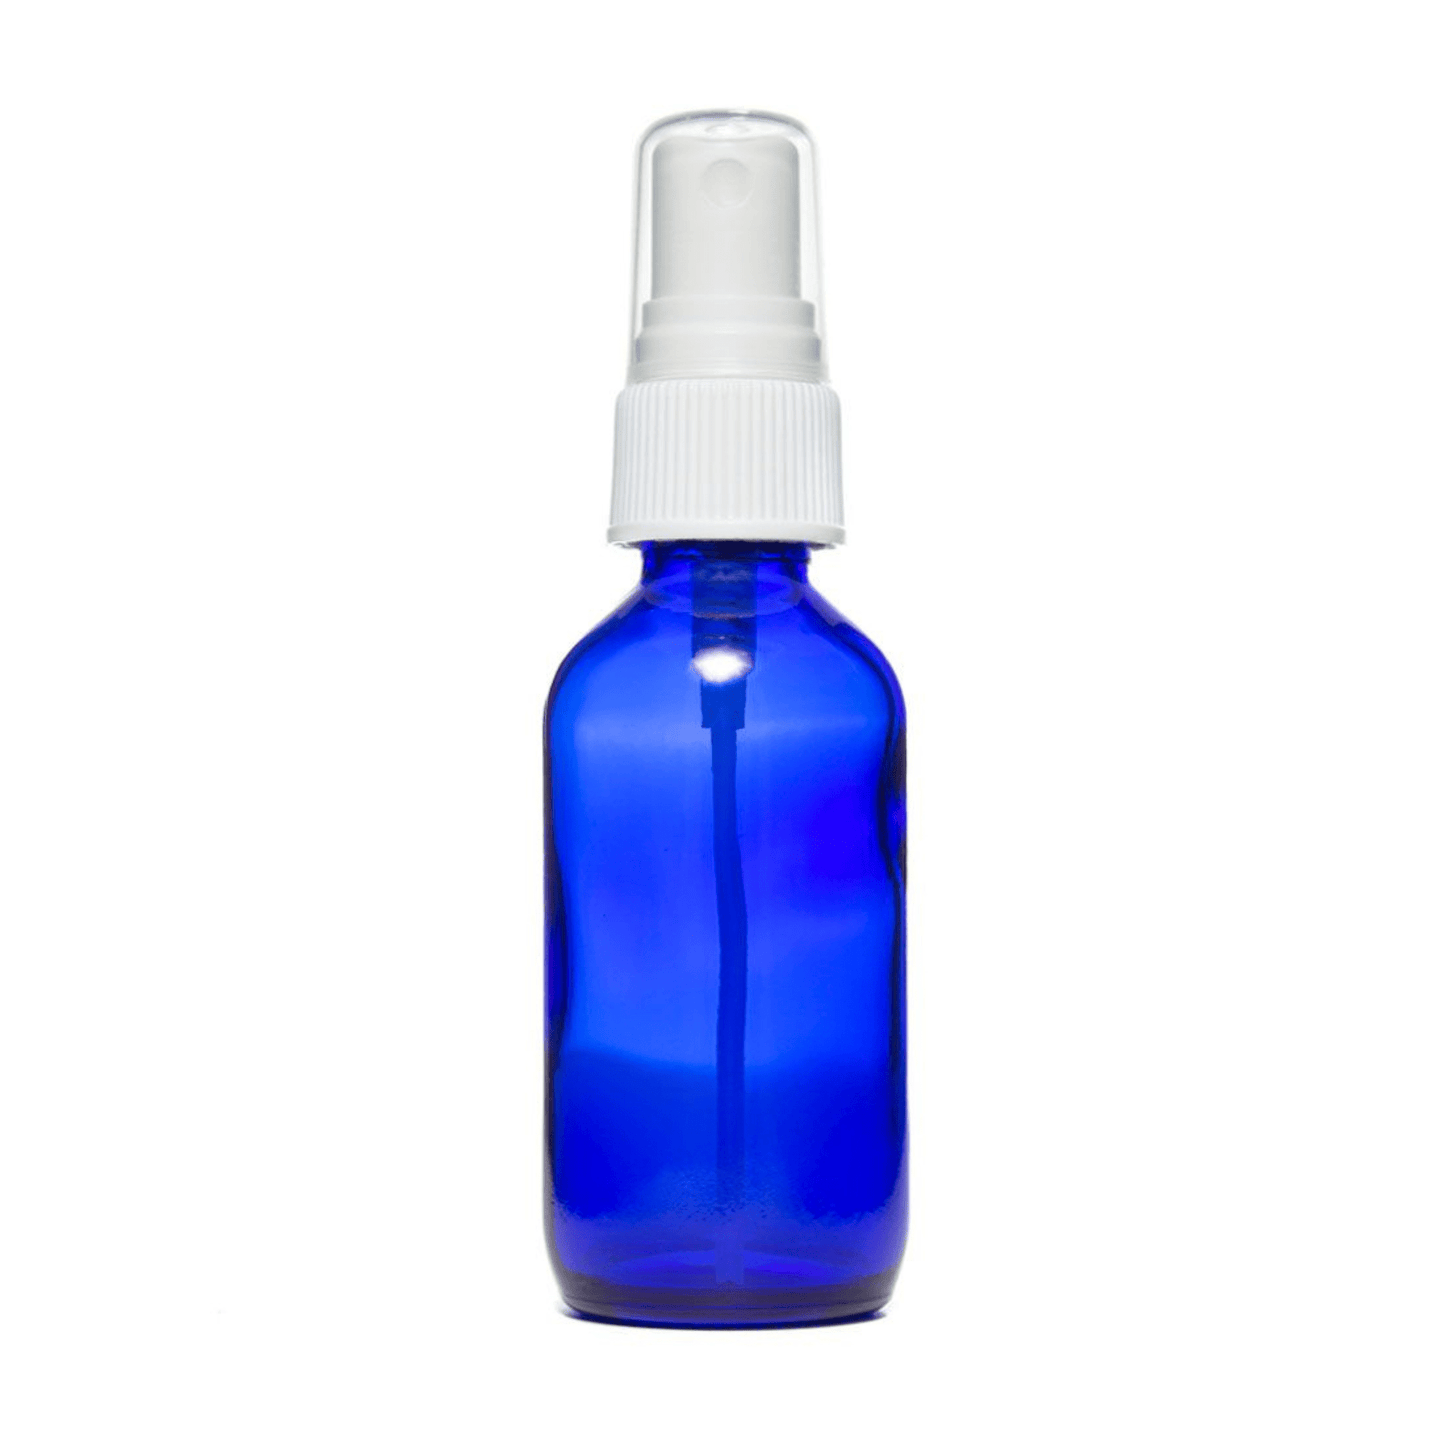 Primary Image of Blue Glass Bottle - Spray Top